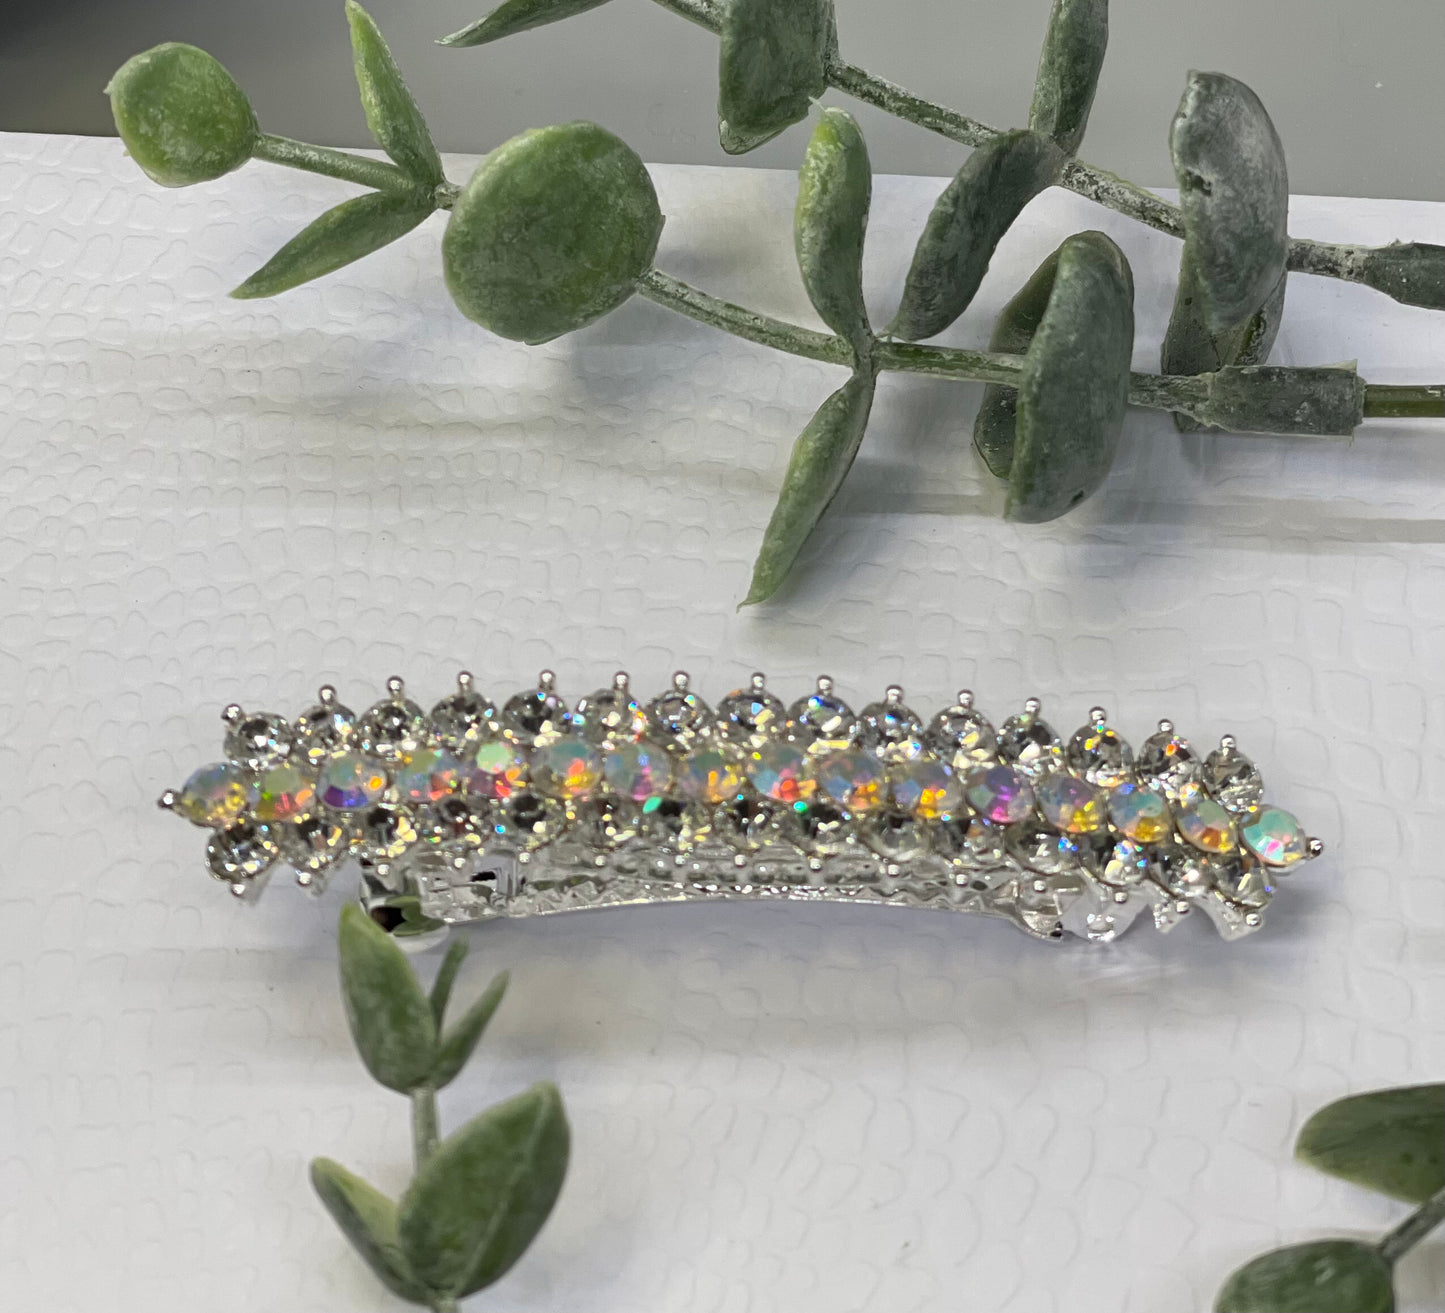 Irridescent Crystal rhinestone barrette approximately 3.0” silver tone formal hair accessories gift wedding bridesmaid